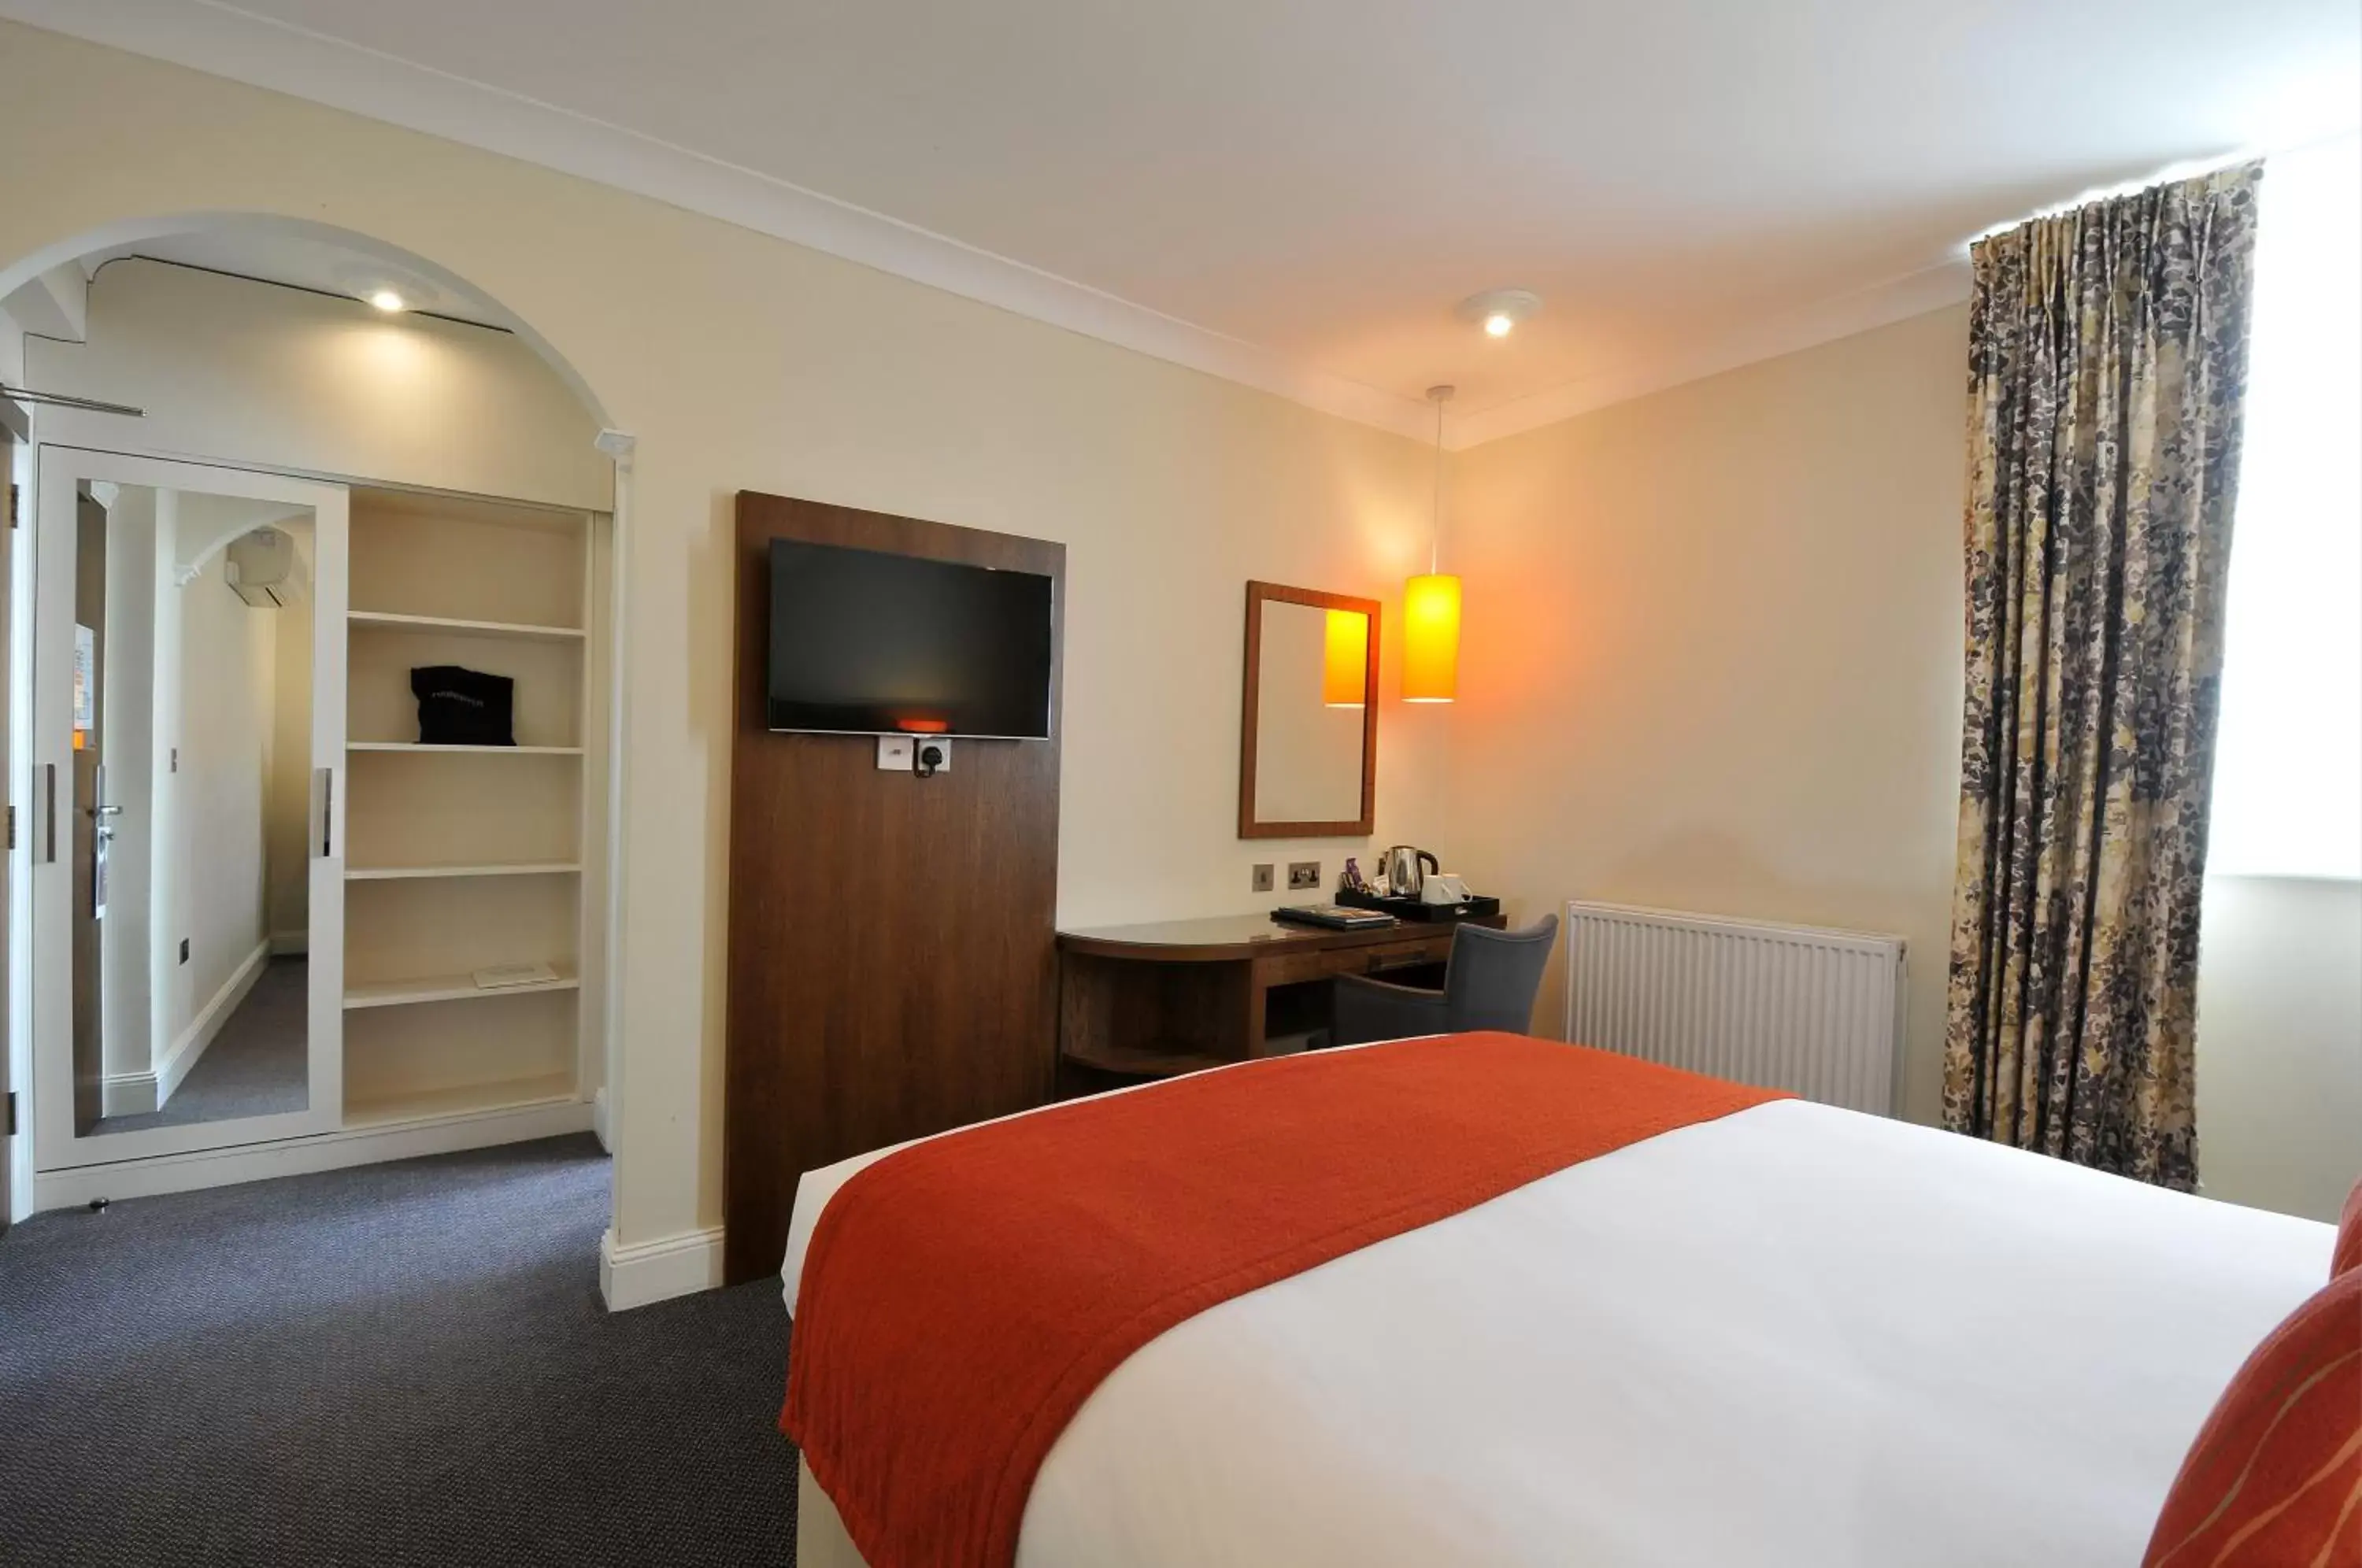 TV and multimedia, Room Photo in Bromley Court Hotel London